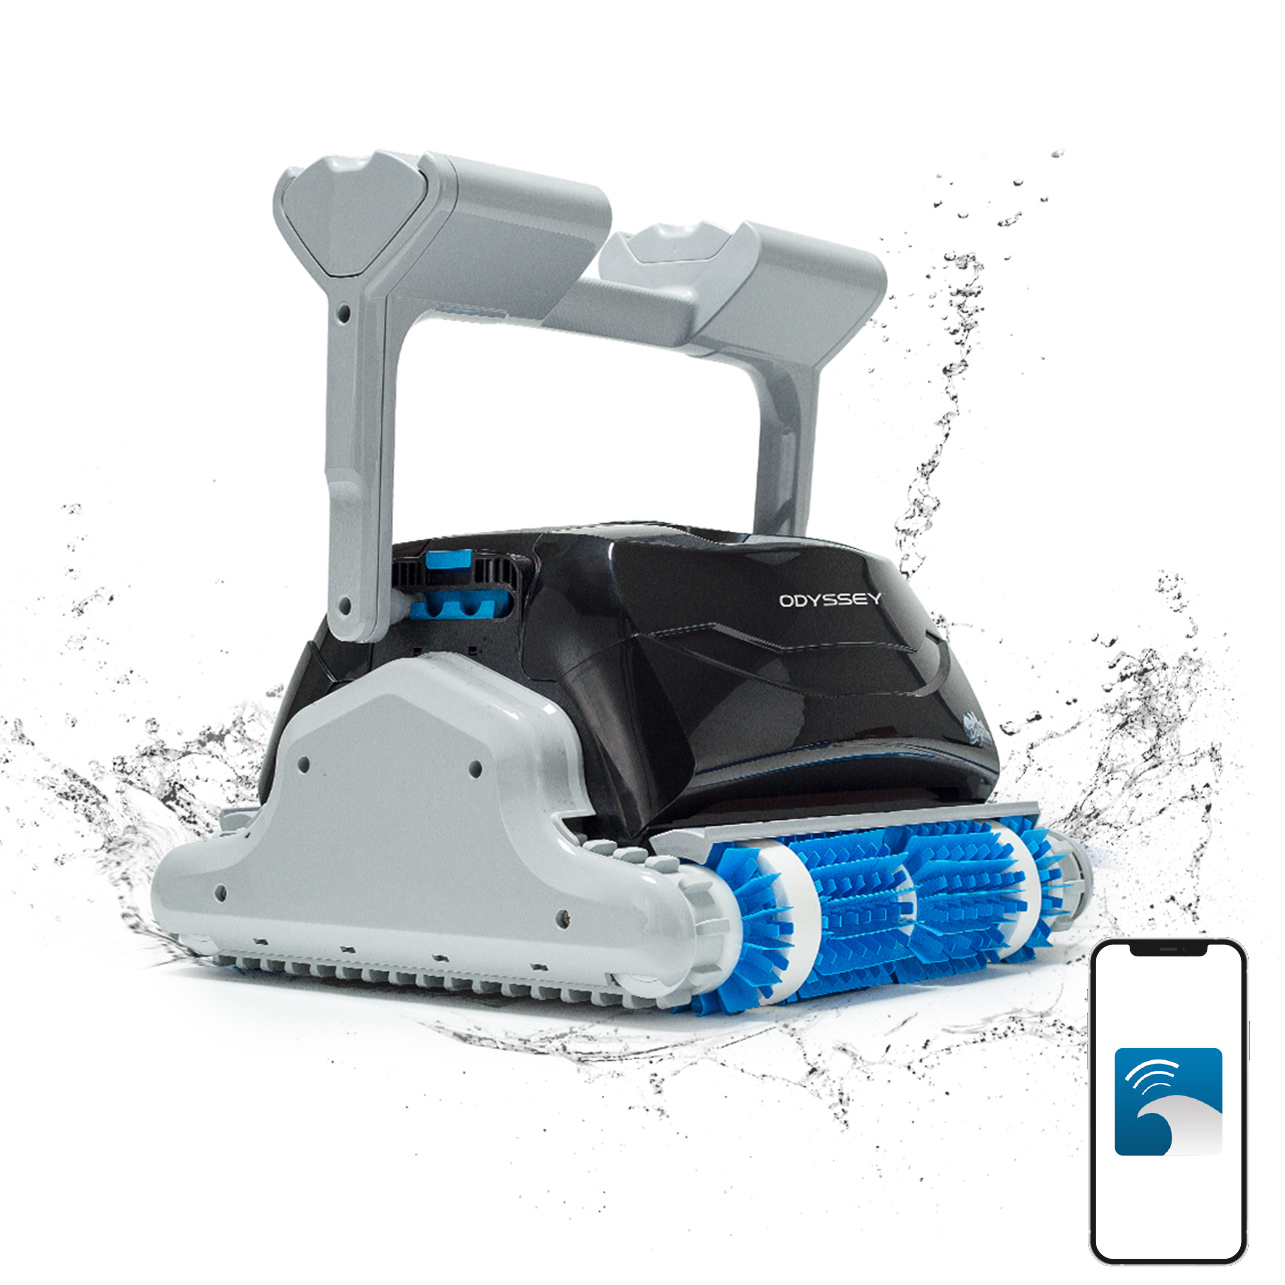 Dolphin Odyssey Robotic Pool Cleaner